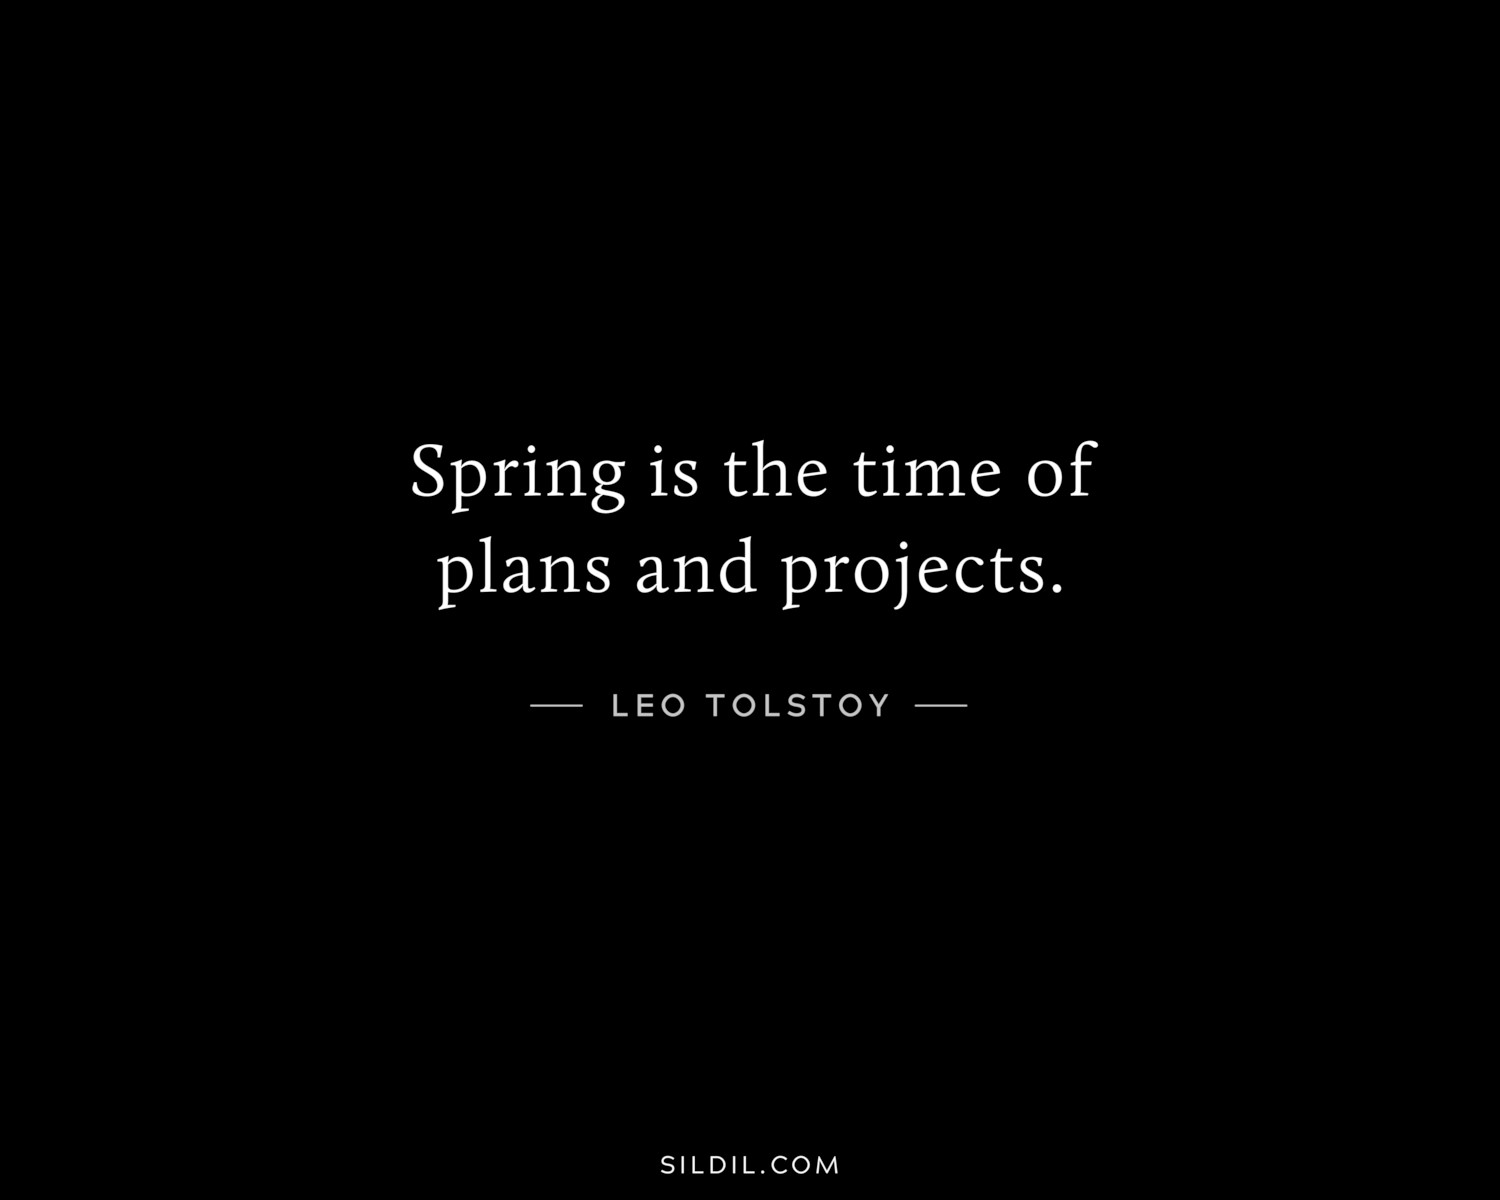 Spring is the time of plans and projects.